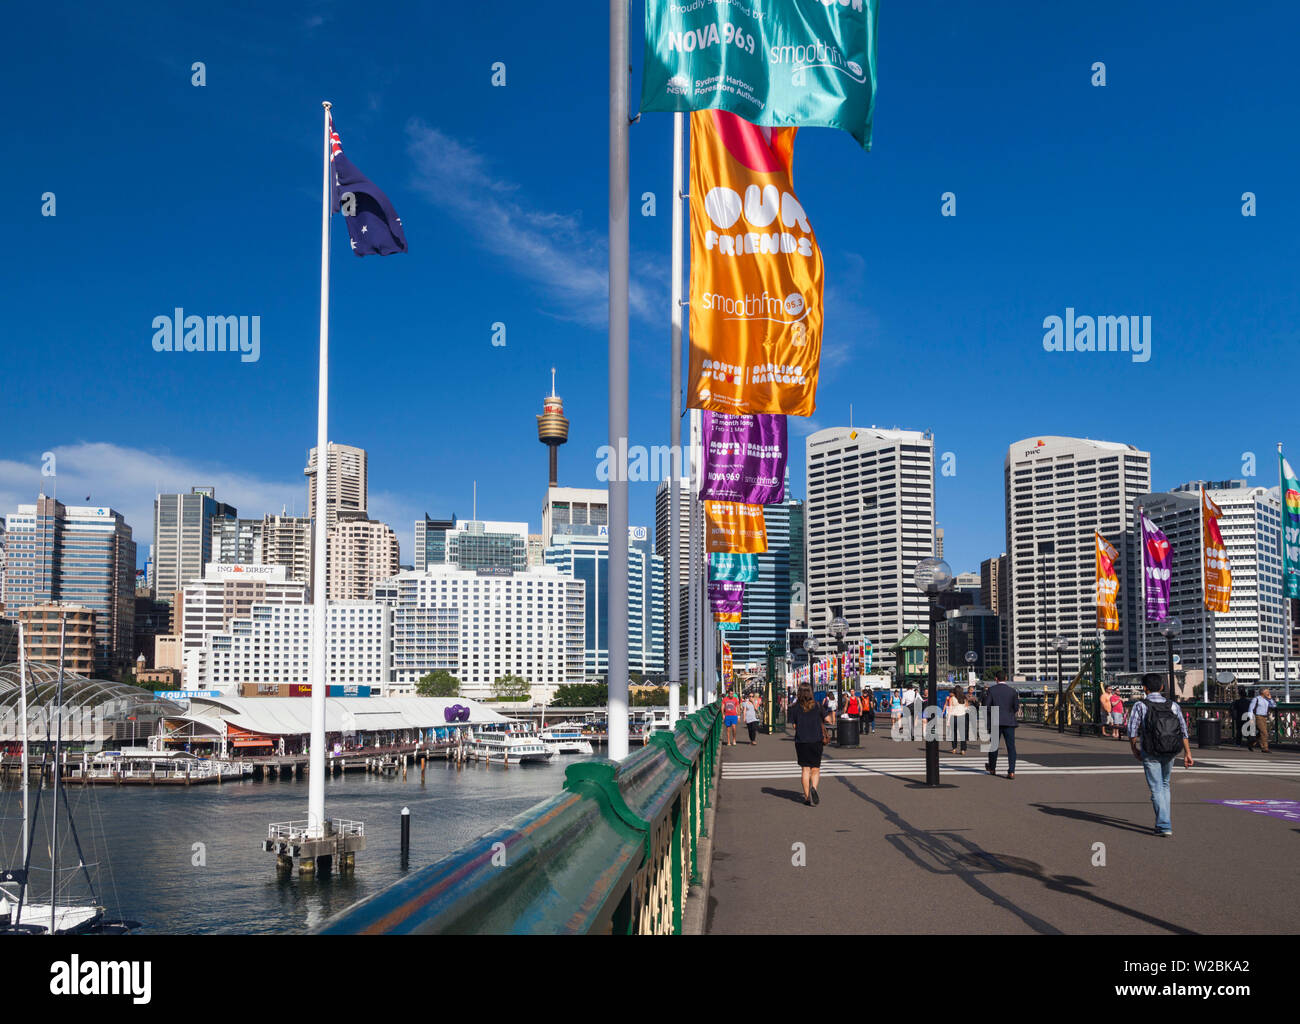 Australia, New South Wales, NSW, Sydney, CBD, Central Business District buildings from Pyrmont Bridge, Darling Harbour Stock Photo